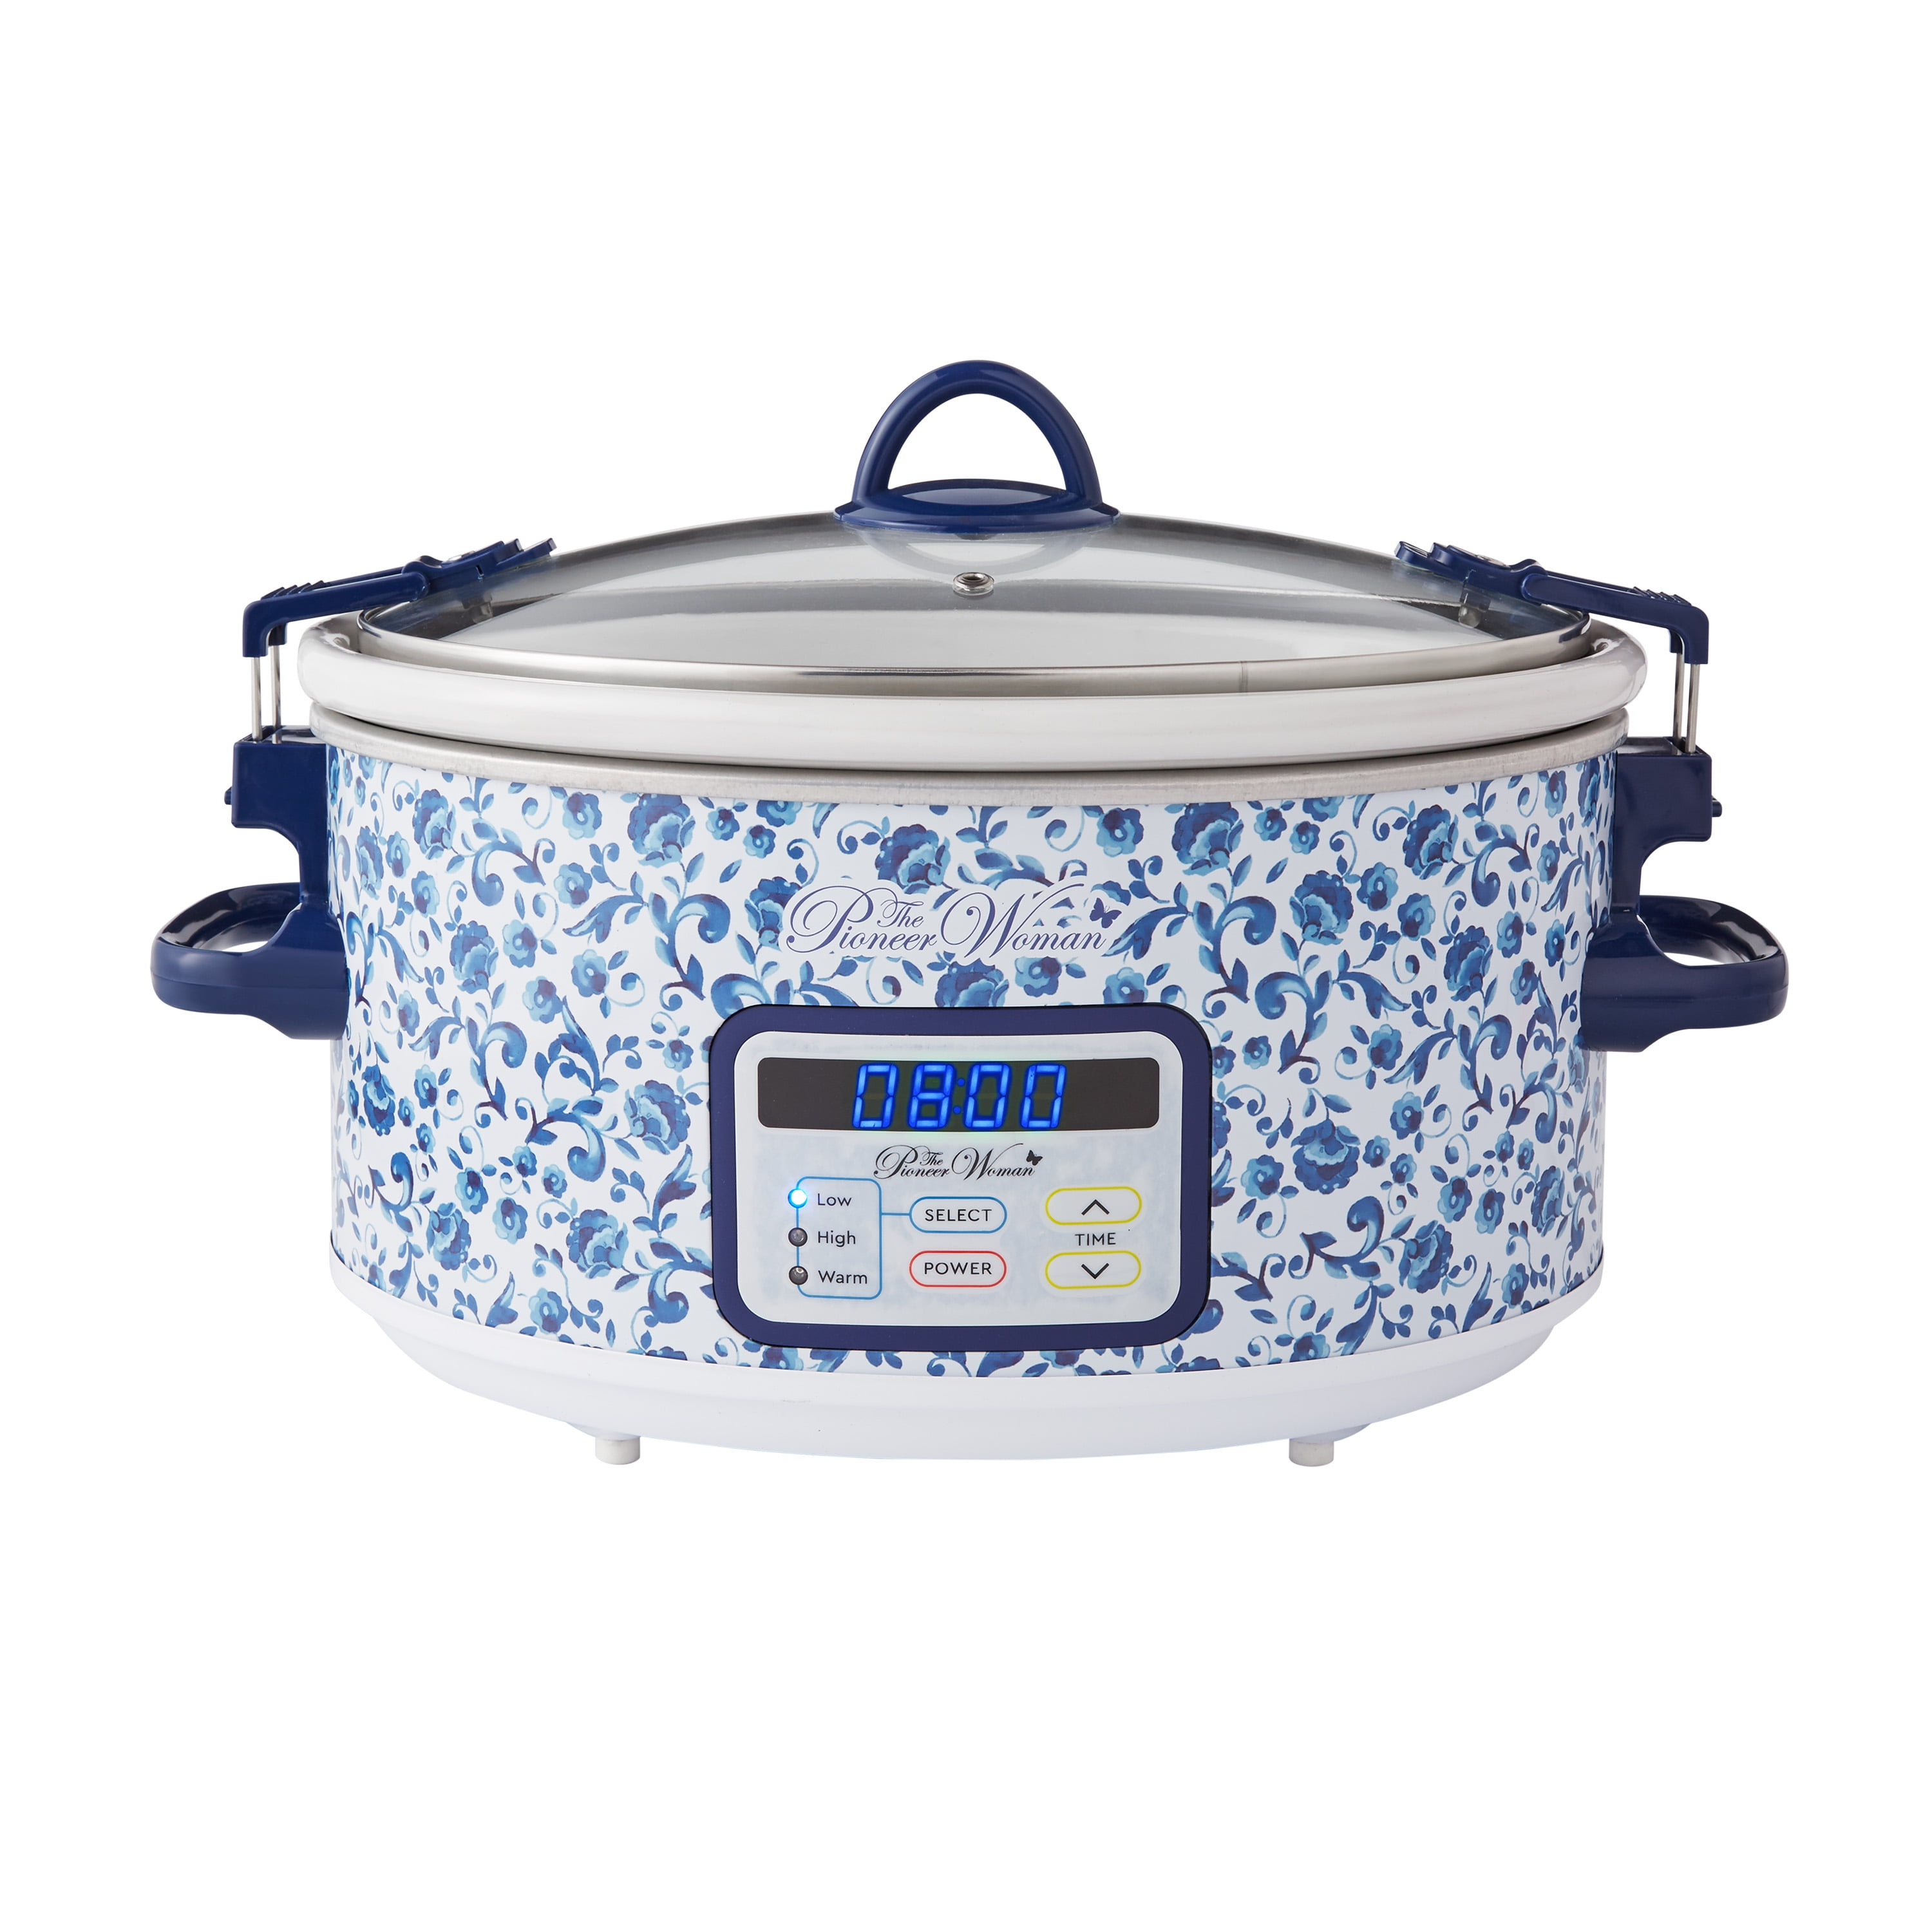 The Pioneer Woman Rose Shadow 6-Quart Portable Slow Cooker 